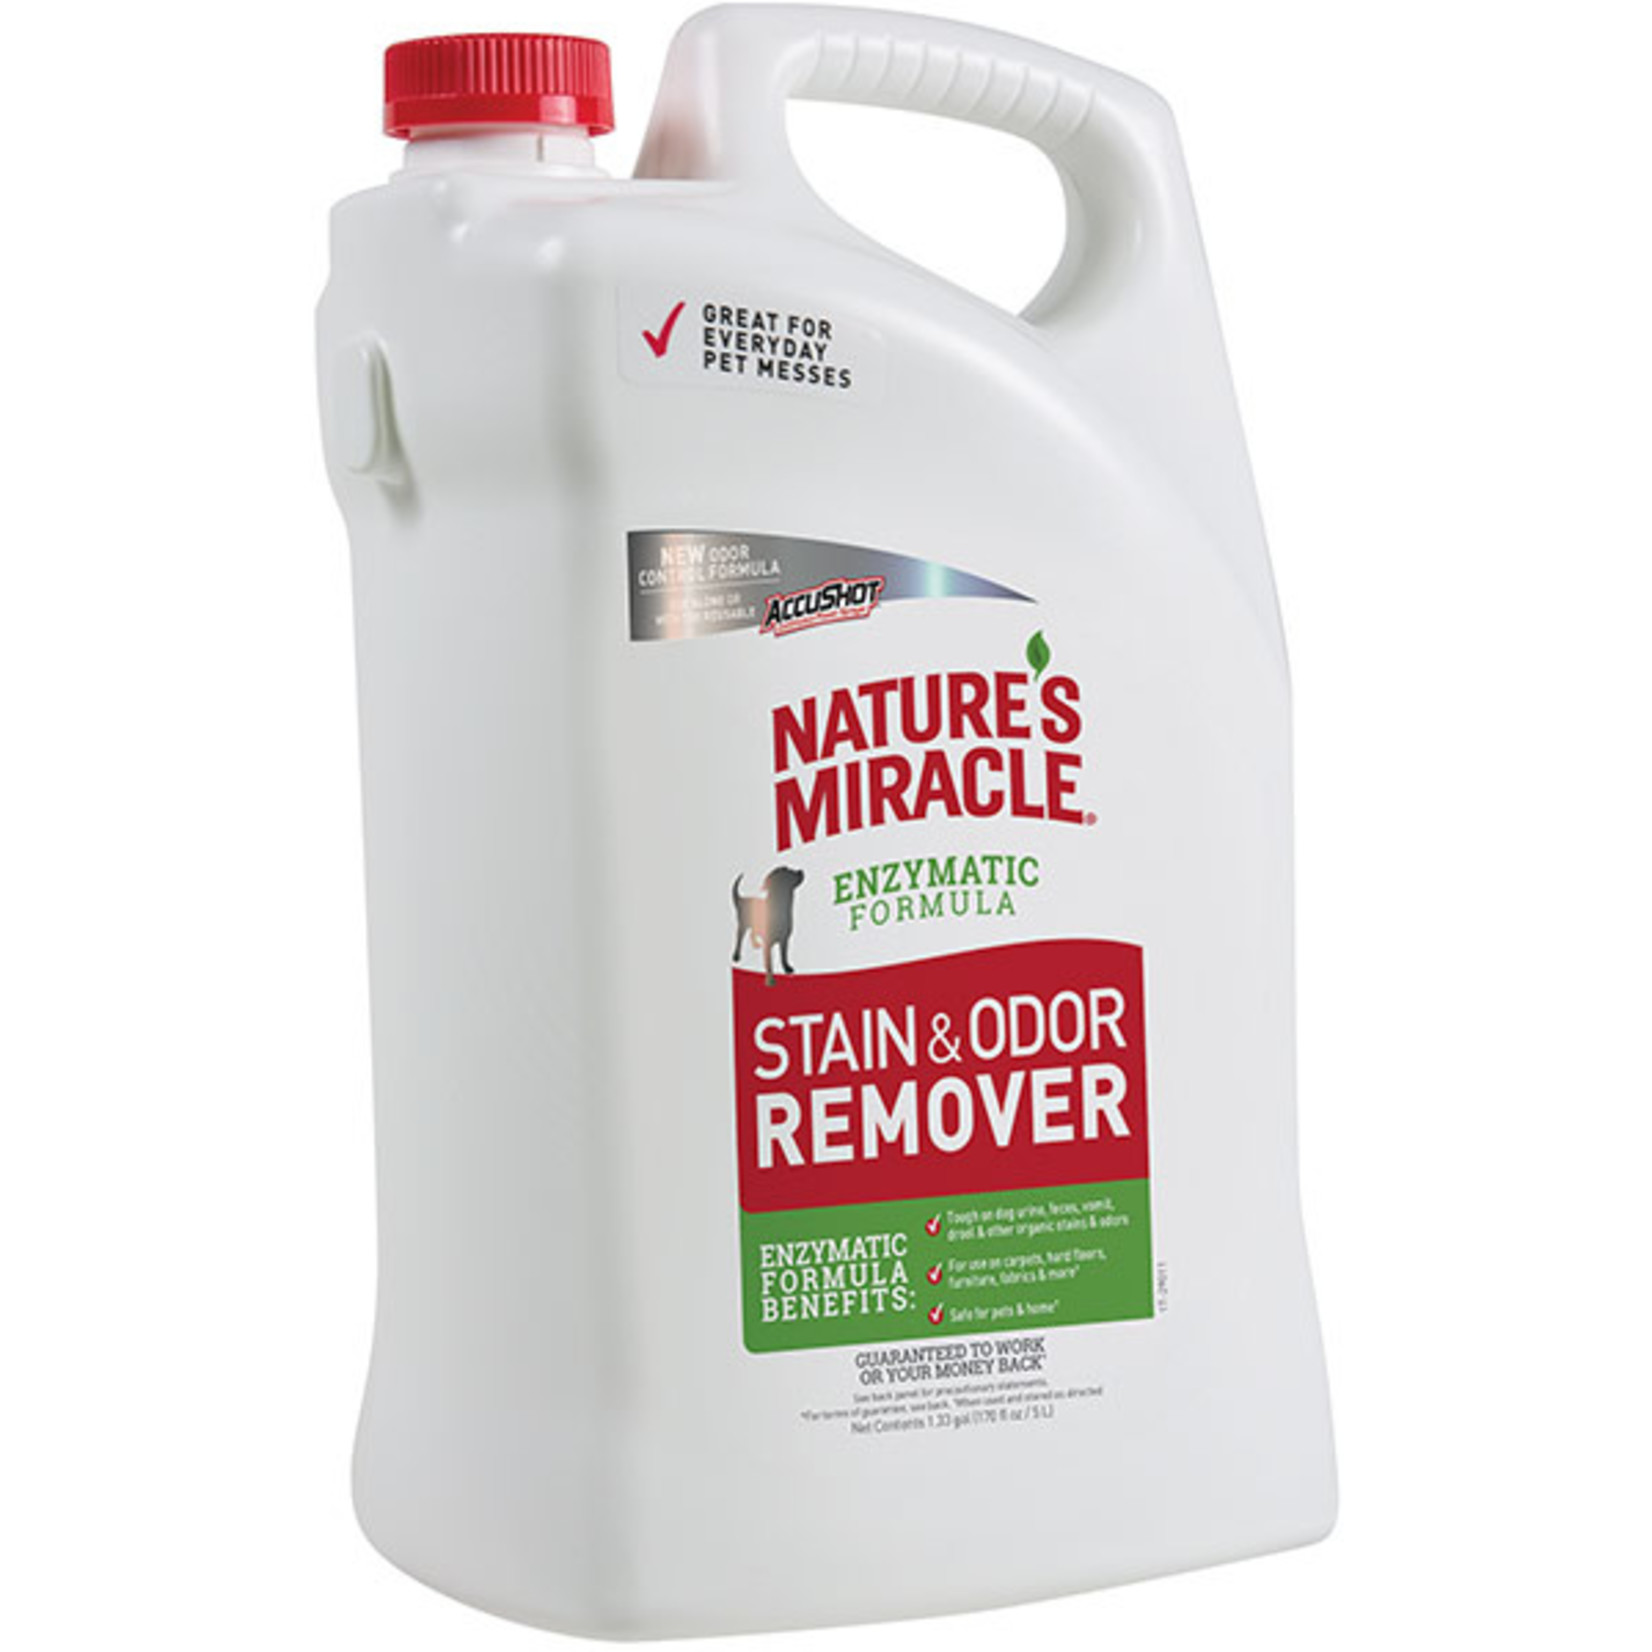 Natures Miracle Nature's Miracle Dog Stain & Odor Remover Enzymatic Formula 170oz Refill